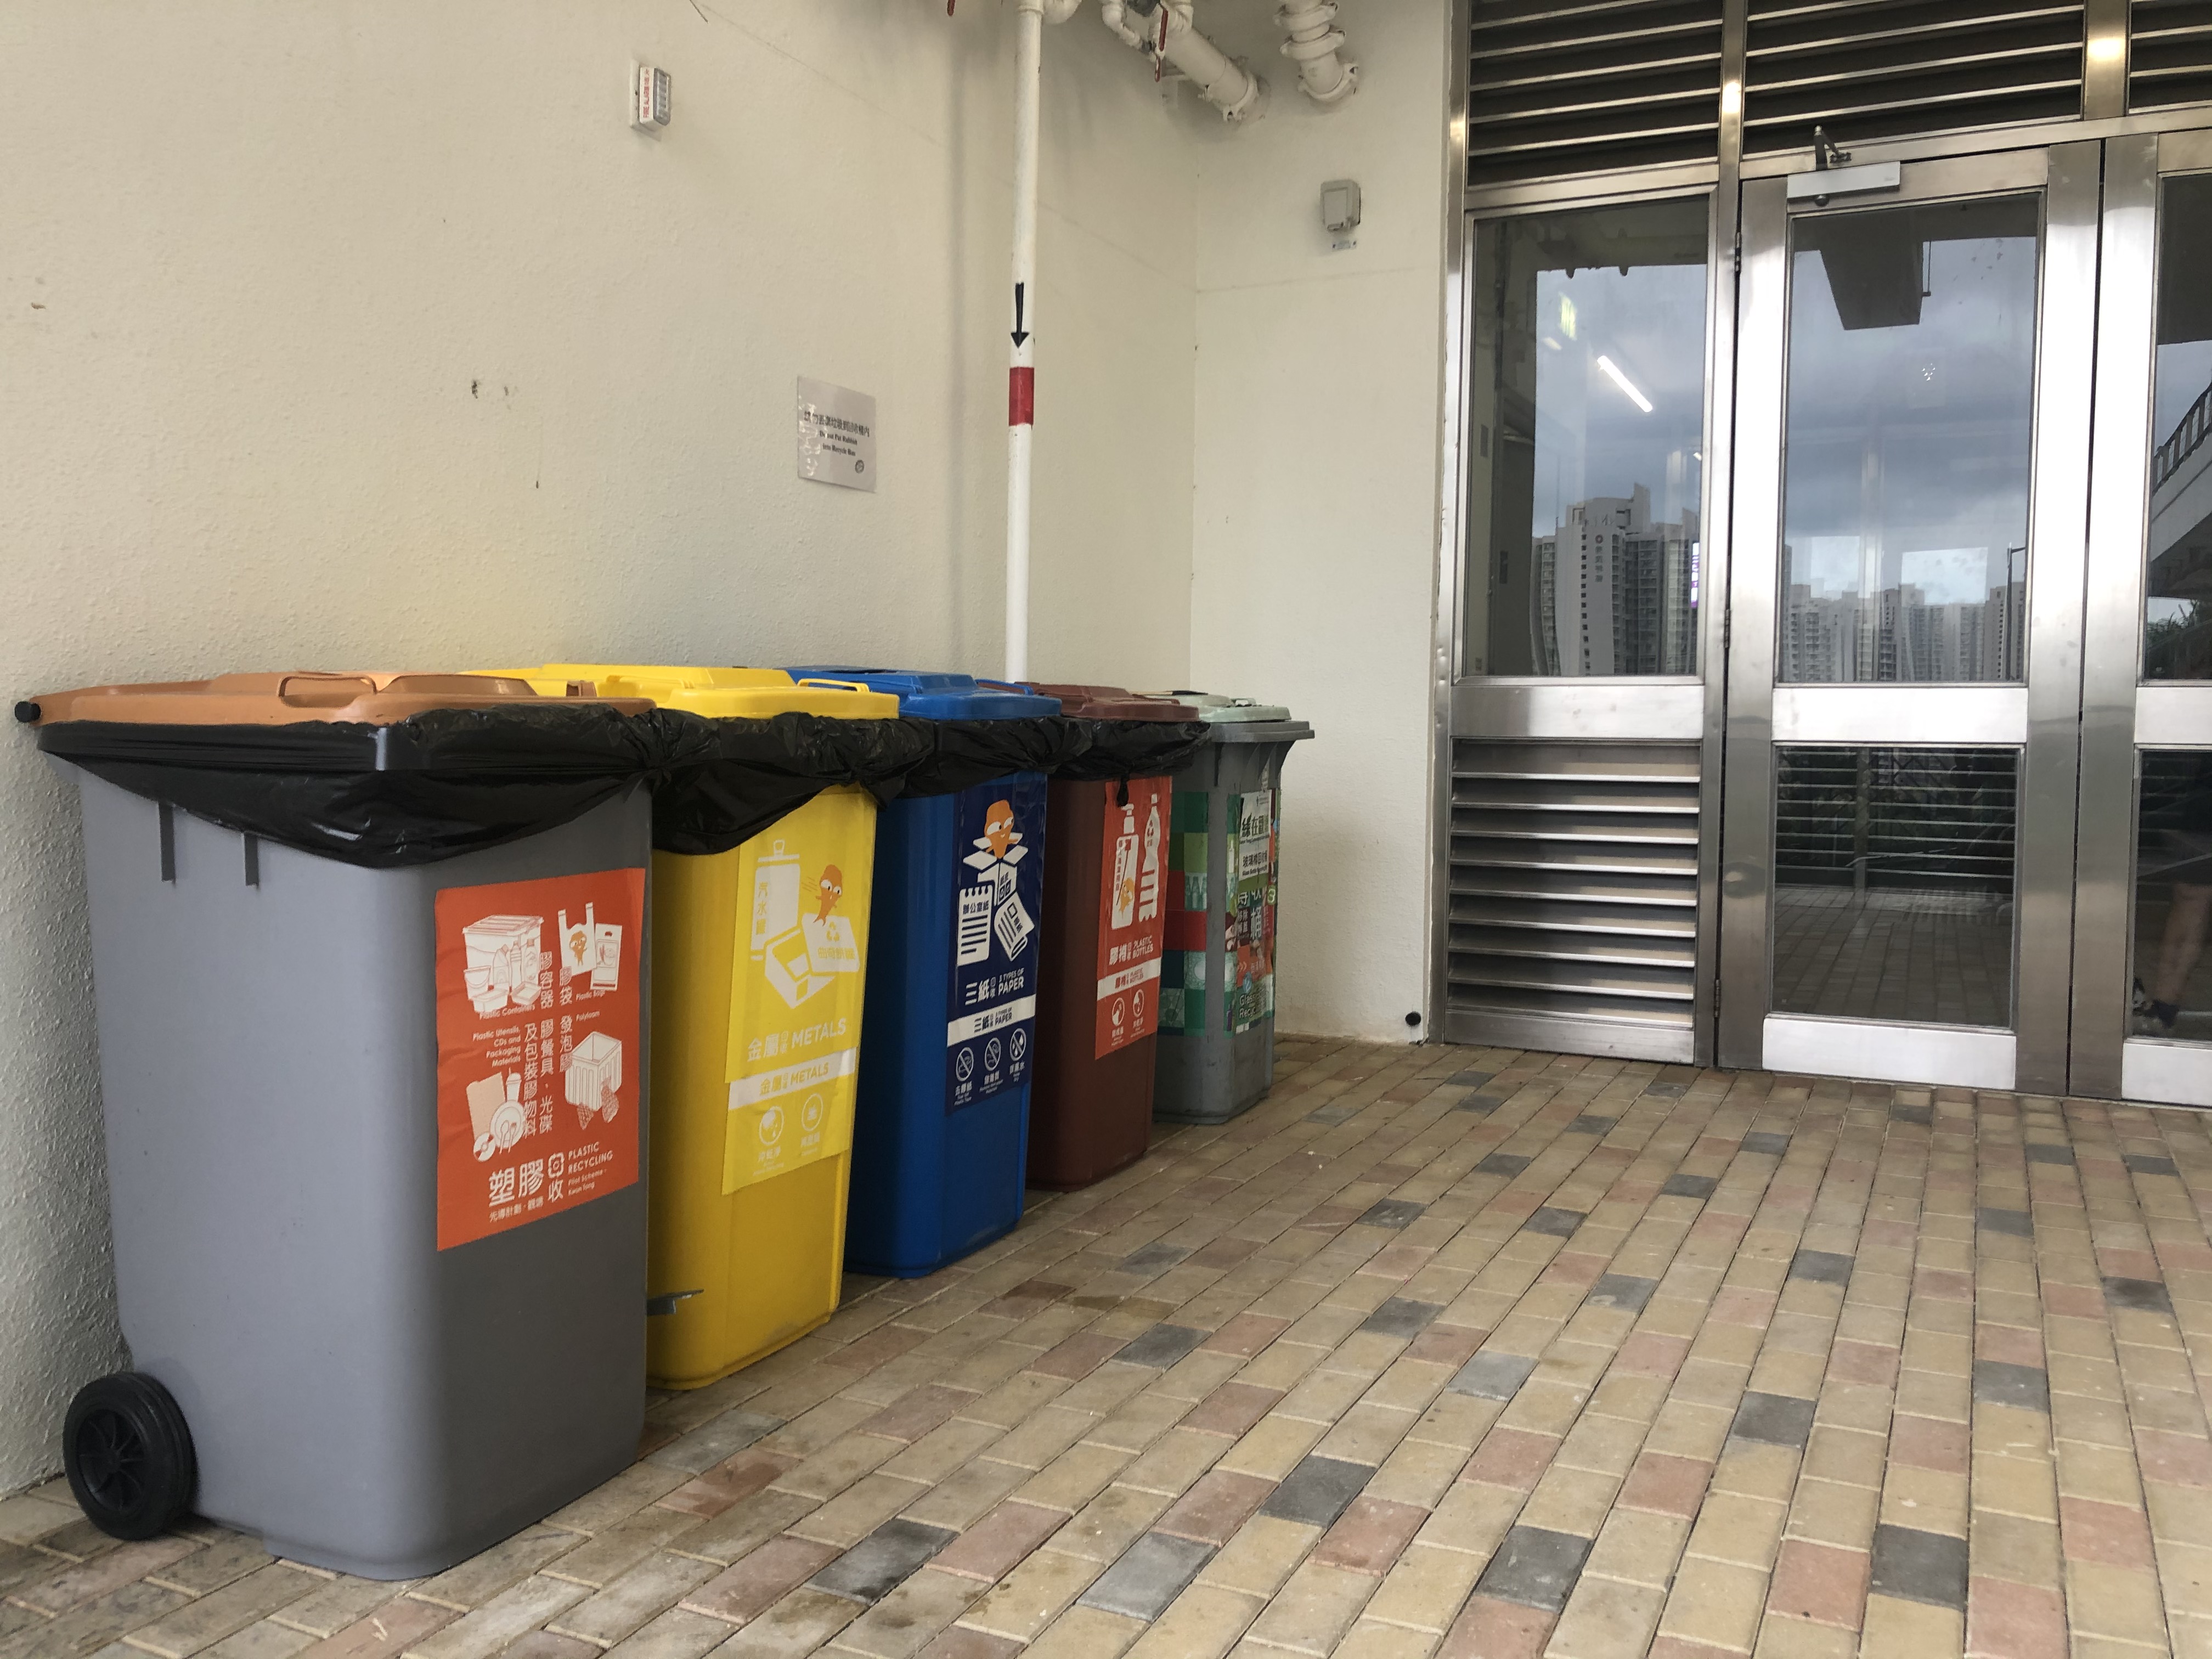 Waste Separation Bins at residential building